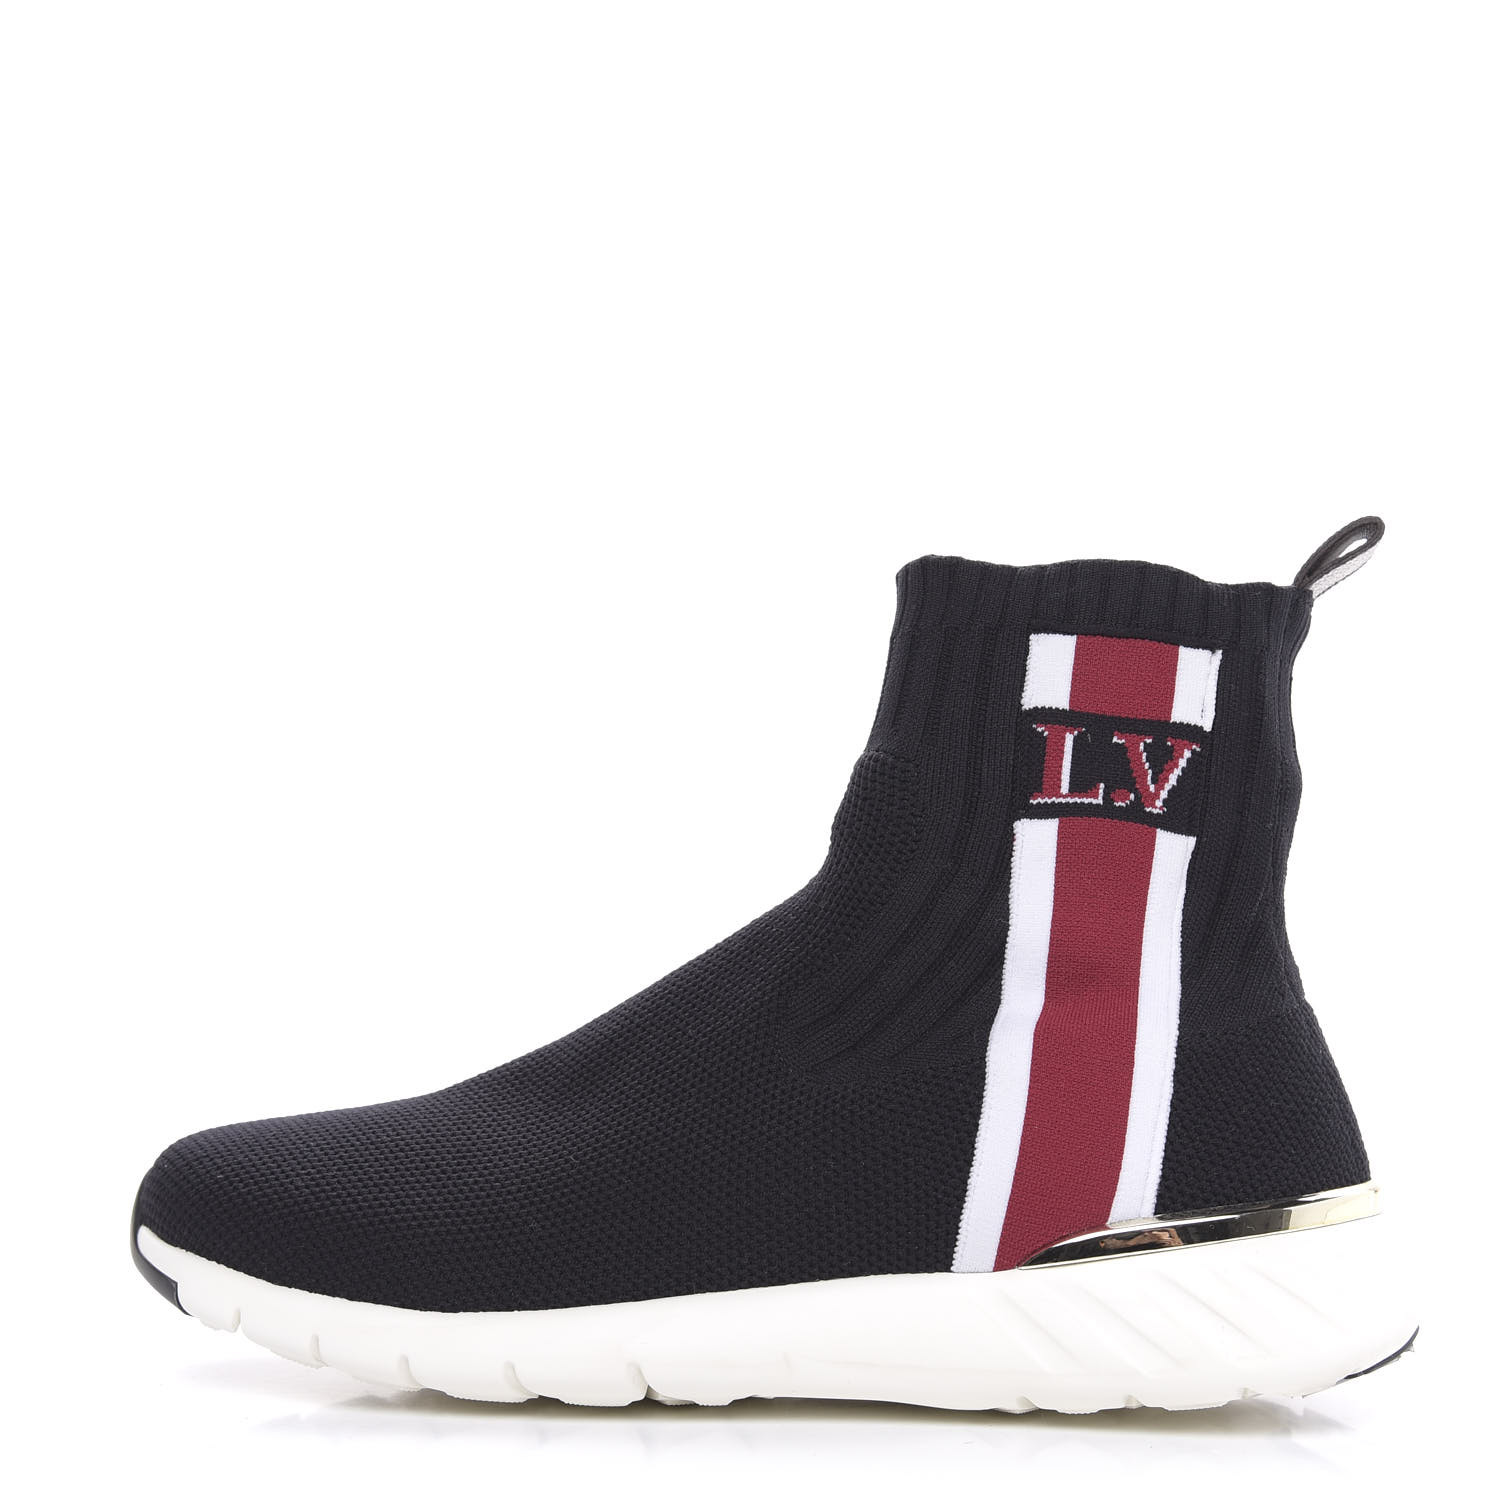 aftergame sneaker boot